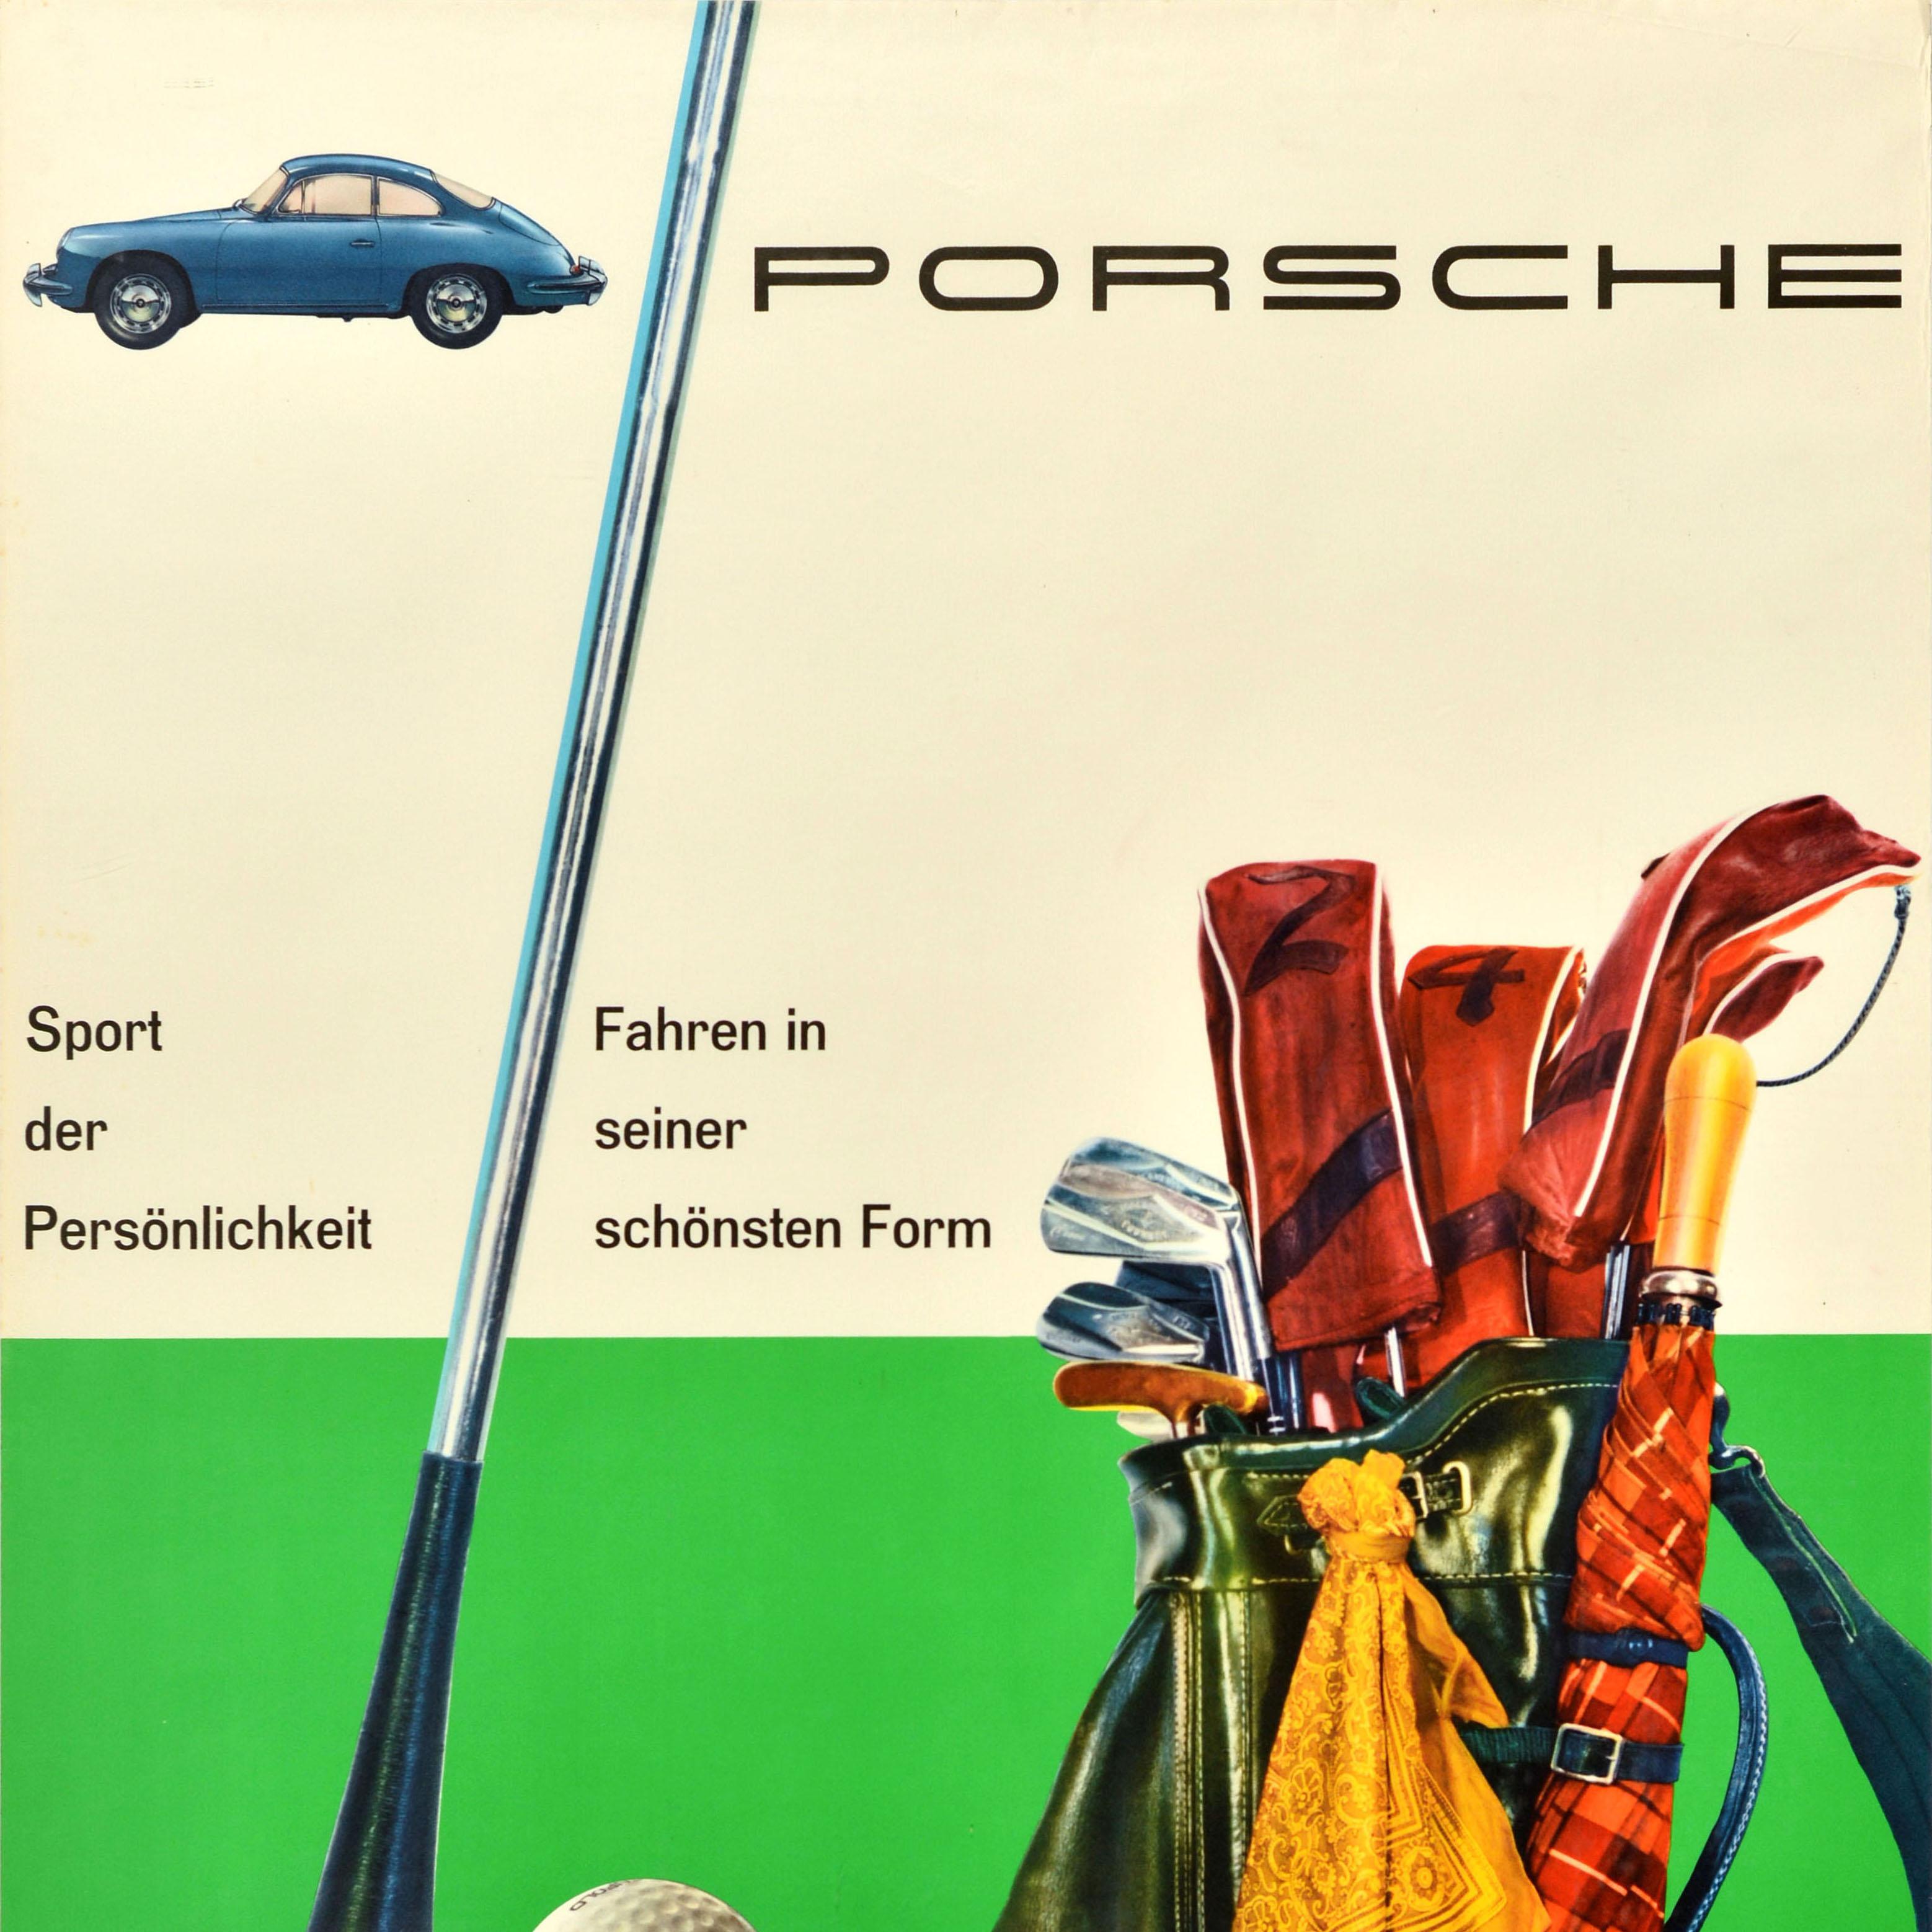 Original vintage car advertising poster for Porsche Sport der Personlichkeit Fahren in seiner schonsten Form / Sport of personality Driving in its finest Form featuring an illustration of a blue Porsche next to the title text above an image of a